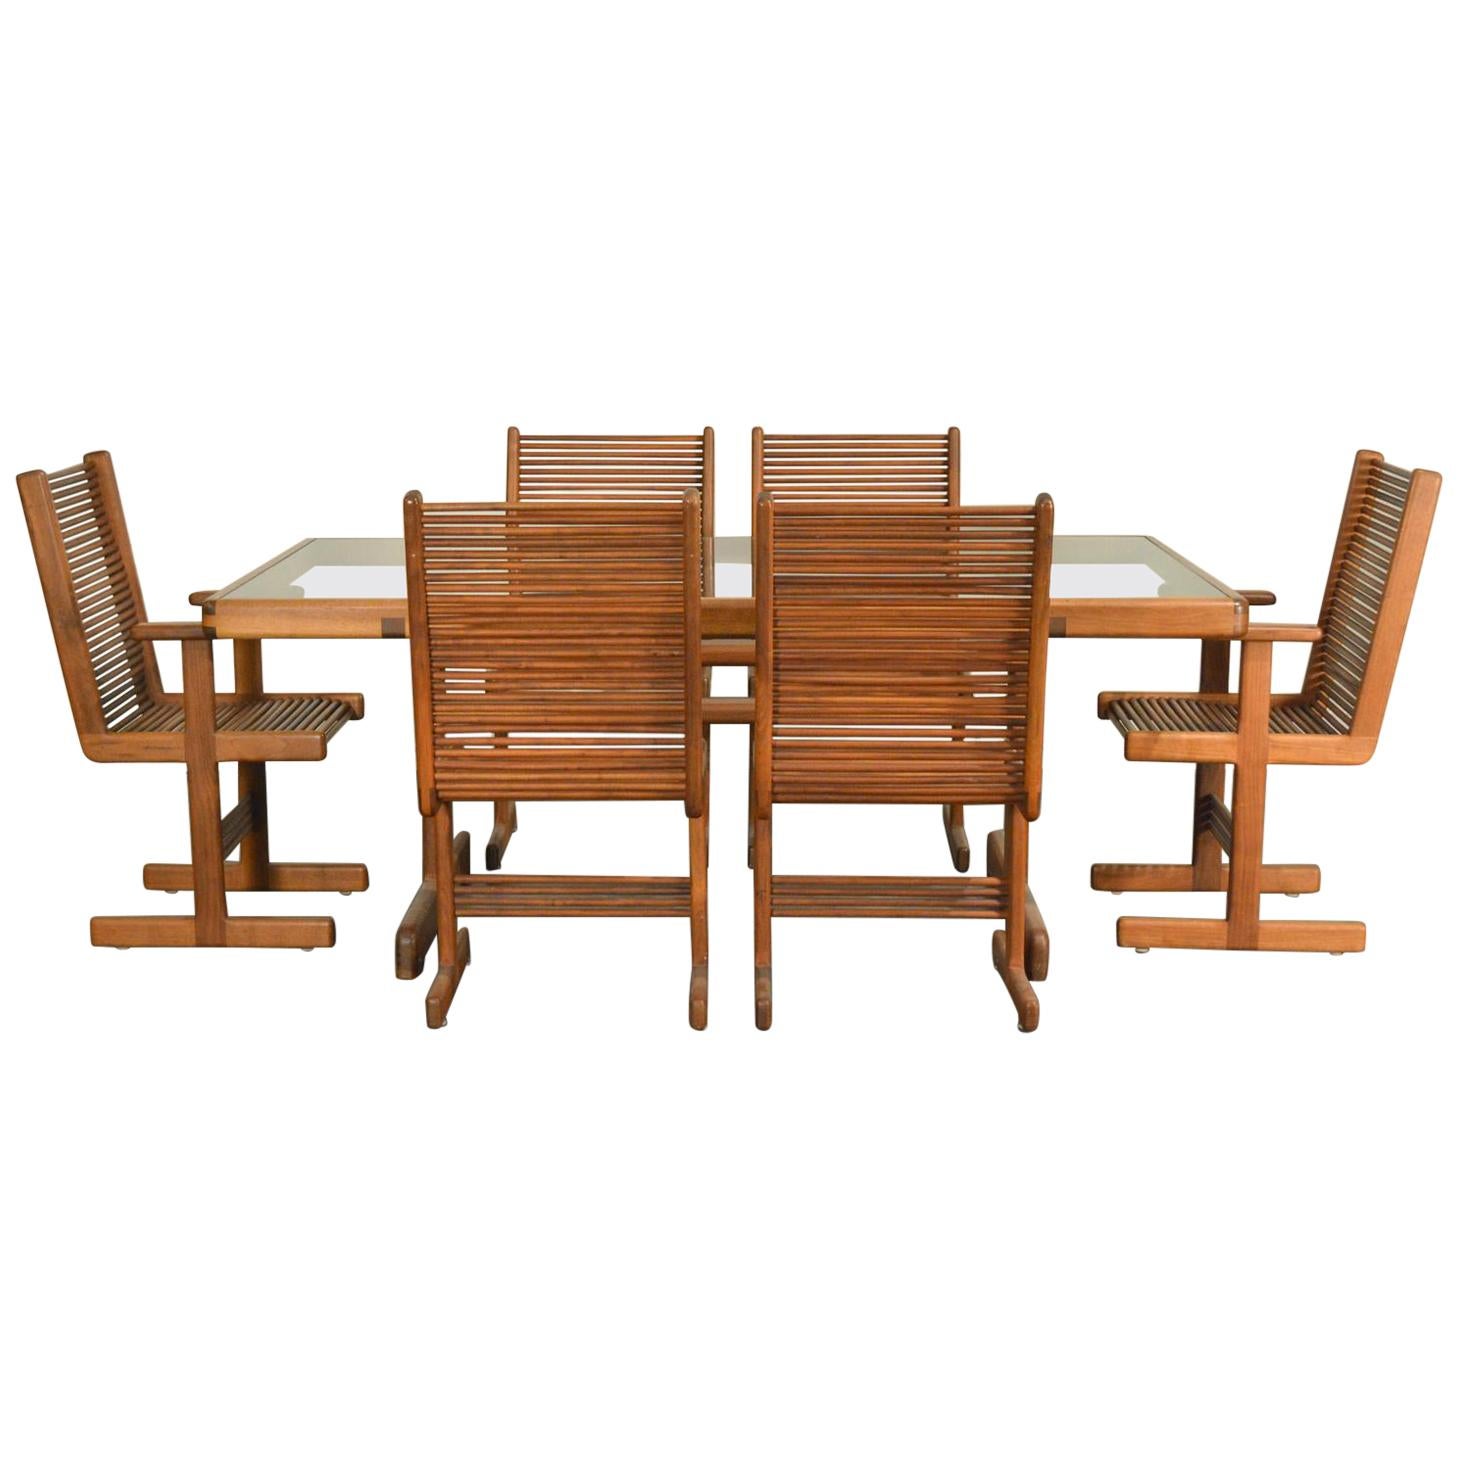 Stephen Hynson Post-Modern Handcrafted Walnut Dining Set w/Table & 6 Chairs